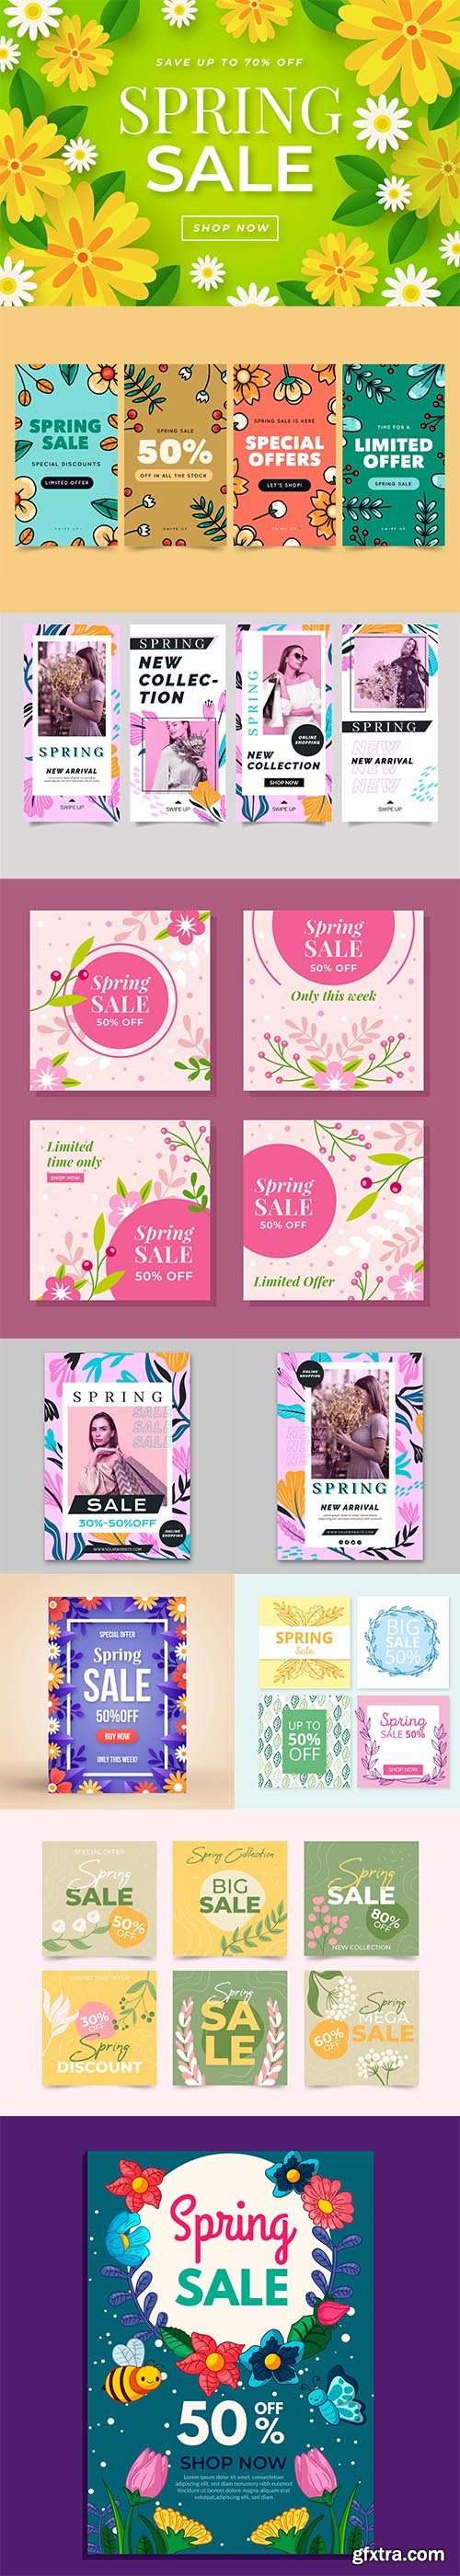 Hand-drawn Spring Sale Vector Collection vol 3